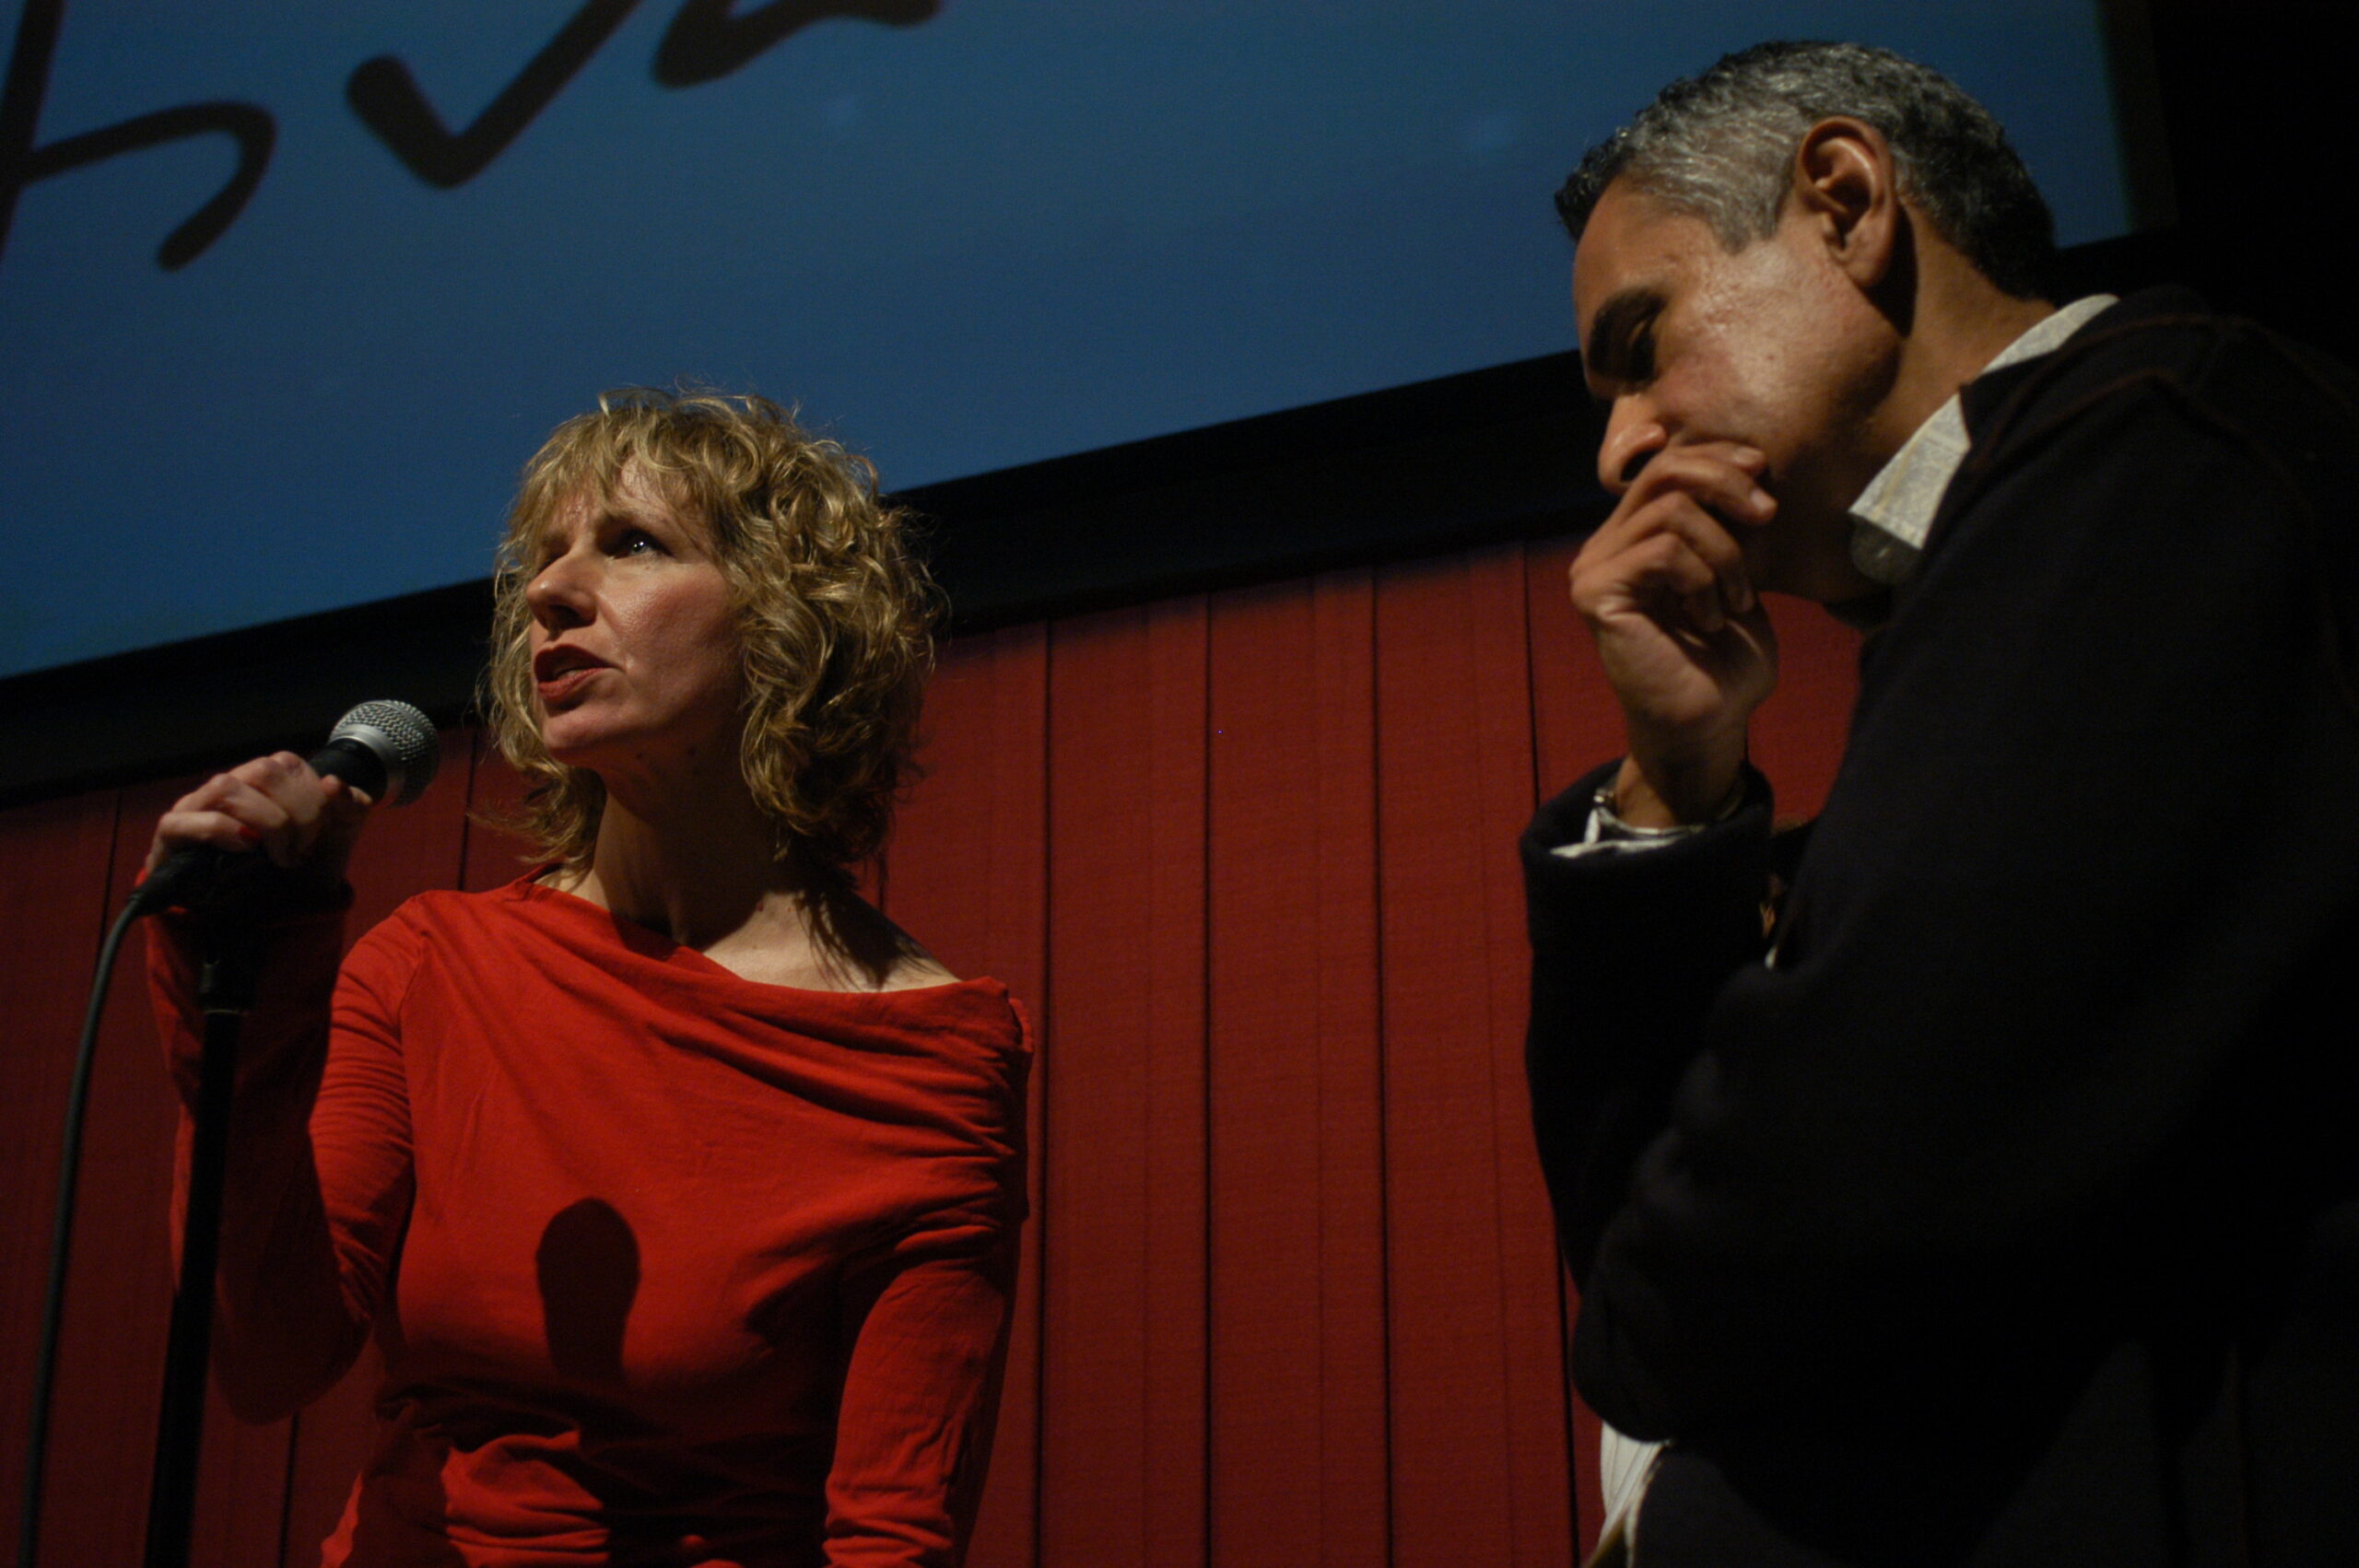 A woman in red with short blonde hair speaks into a mic in front of a large screen. Next to her is a Hispanic man with grey/black hair wearing a suit.